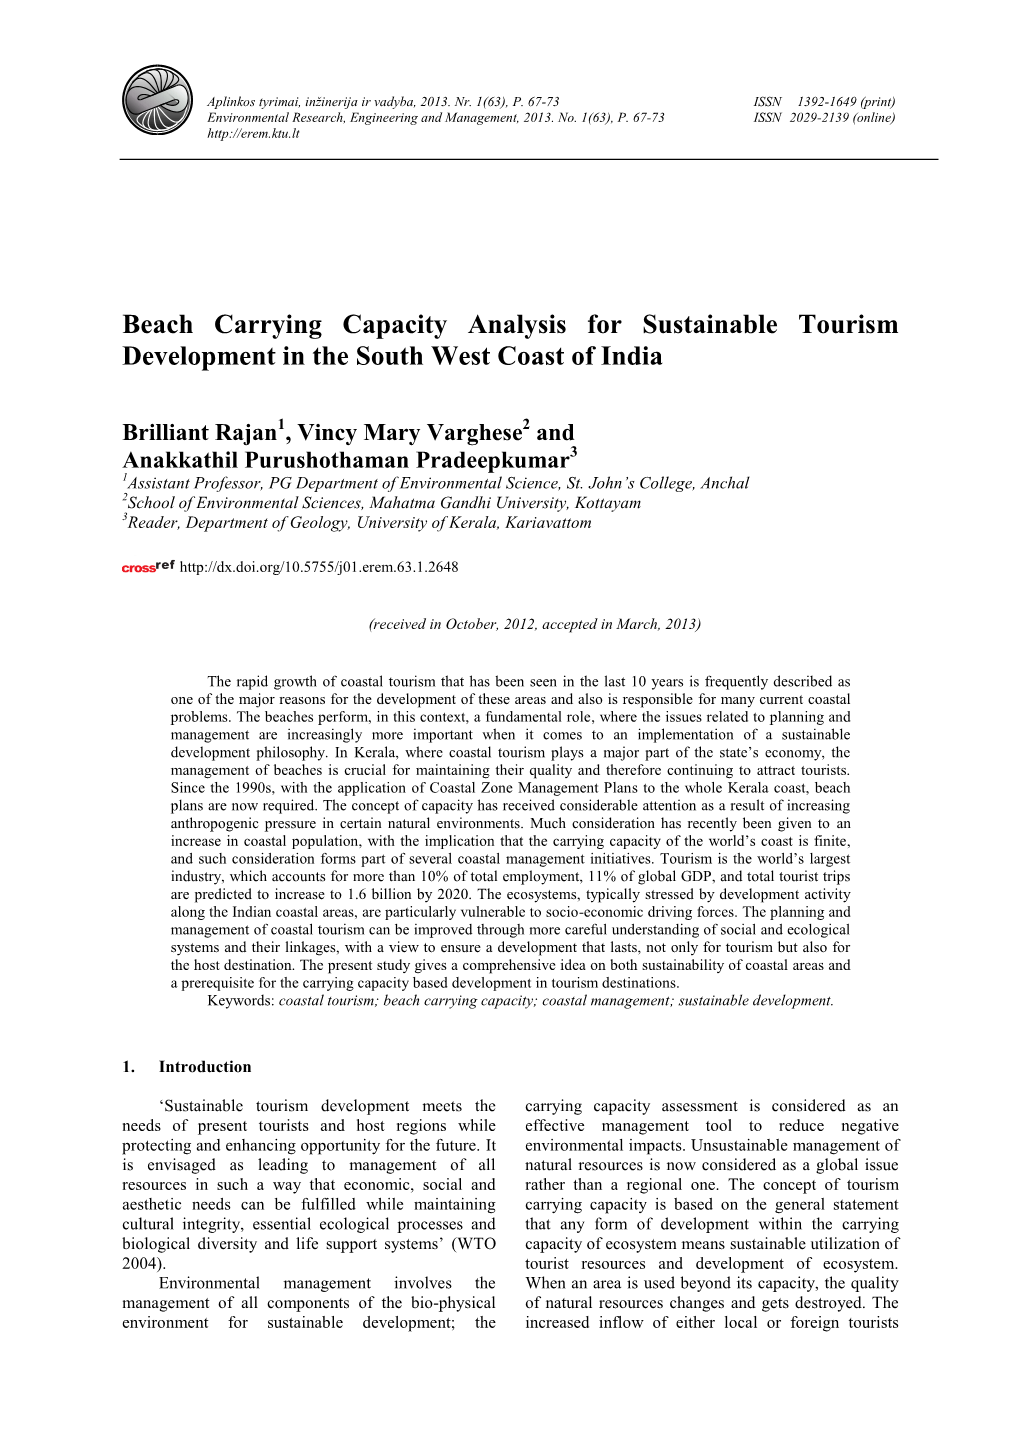 Beach Carrying Capacity Analysis for Sustainable Tourism Development in the South West Coast of India